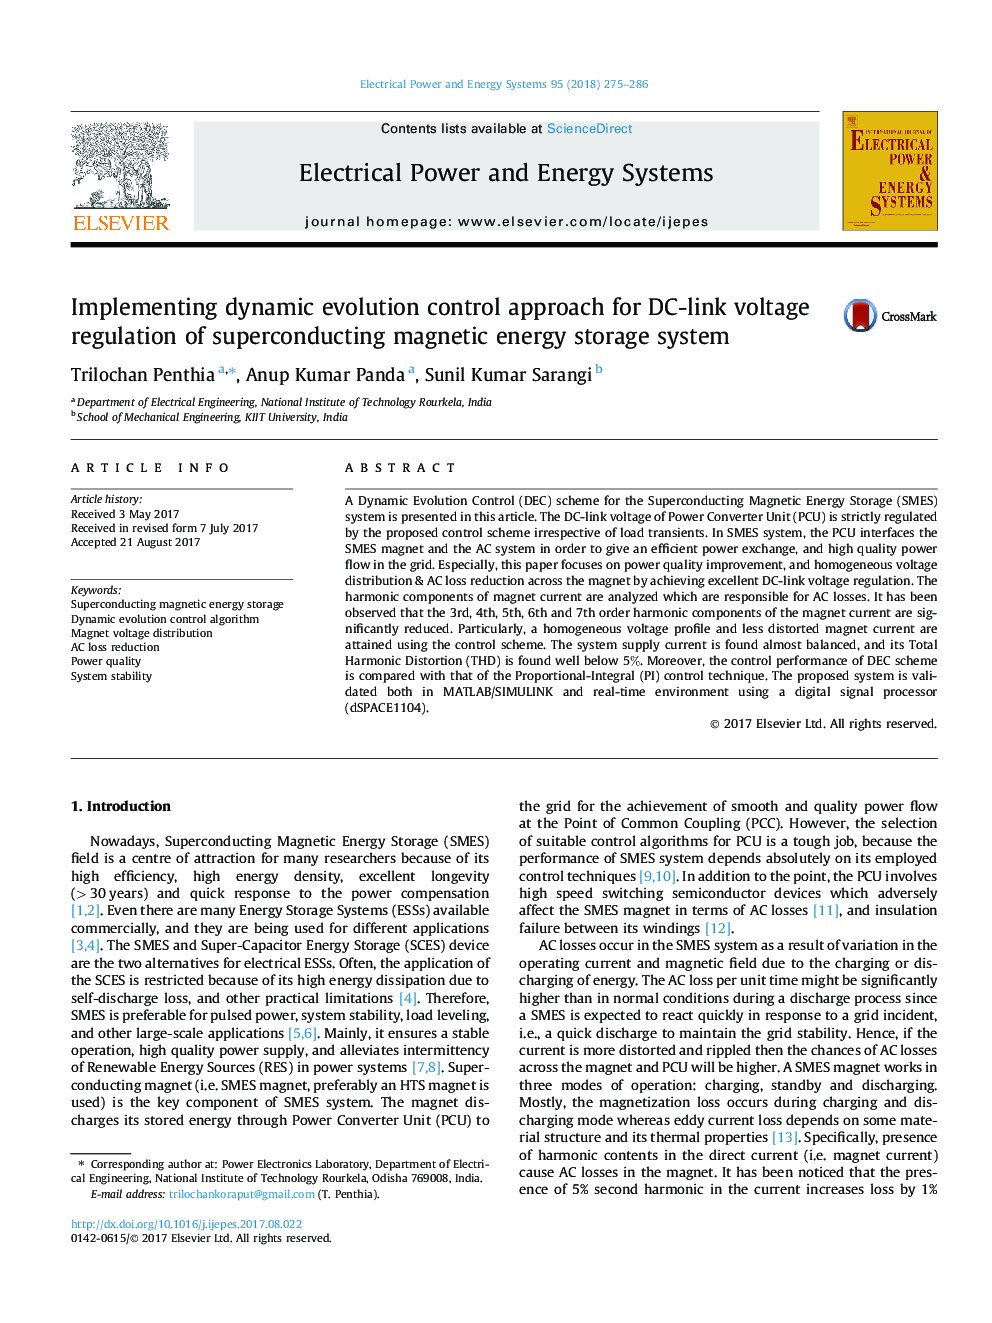 Implementing dynamic evolution control approach for DC-link voltage regulation of superconducting magnetic energy storage system